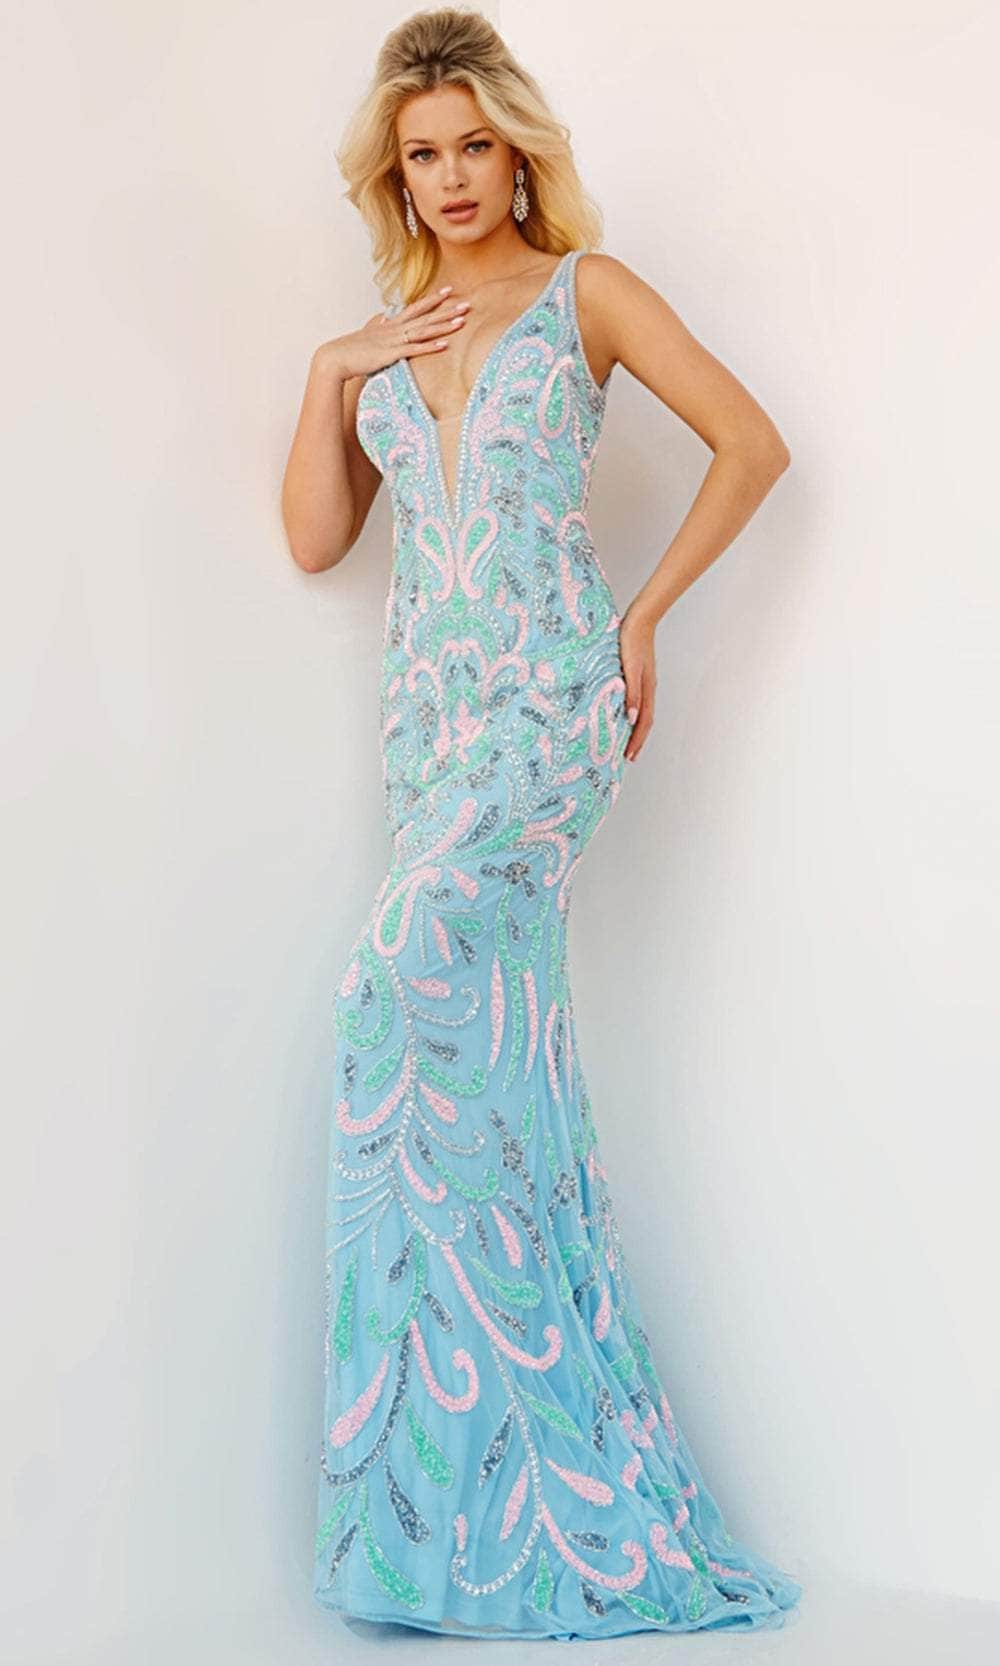 Jovani 23511 - Bejeweled Allover Plunging Gown Prom Dresses 00 / Light-Blue Multi